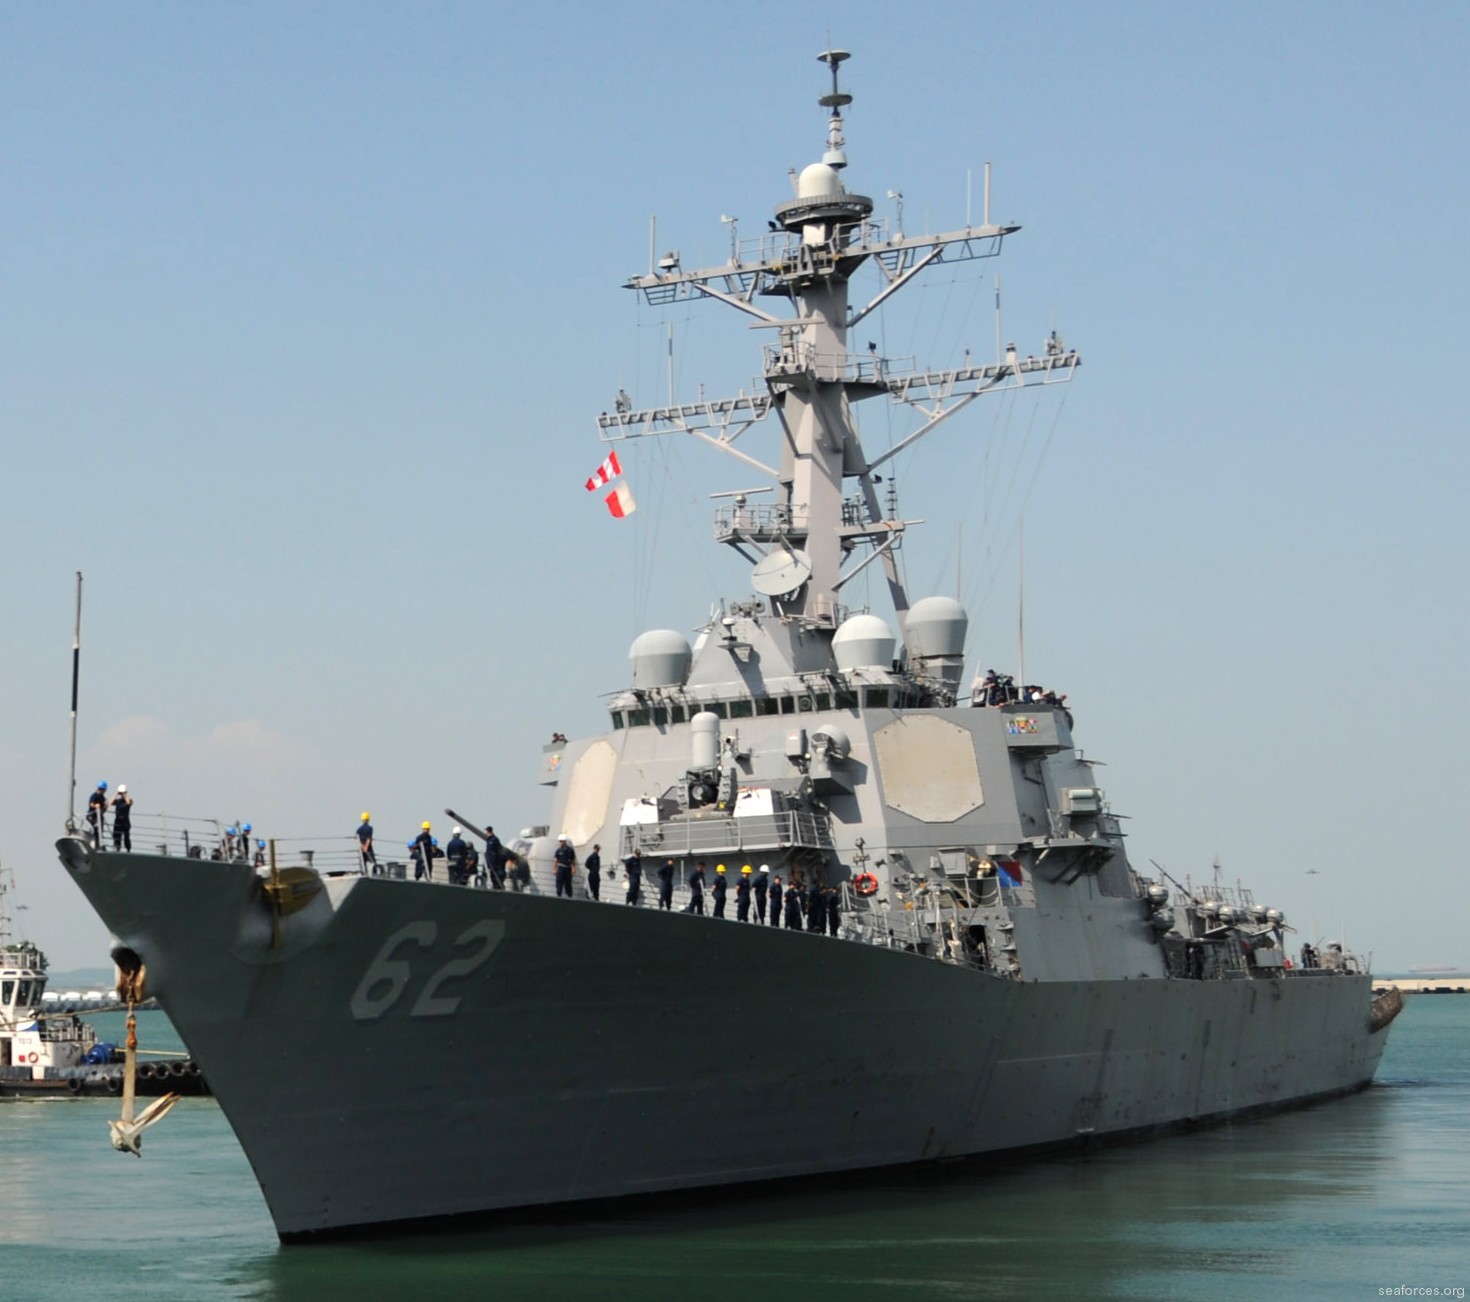 ddg-62 uss fitzgerald guided missile destroyer 2013 43 changi singapore